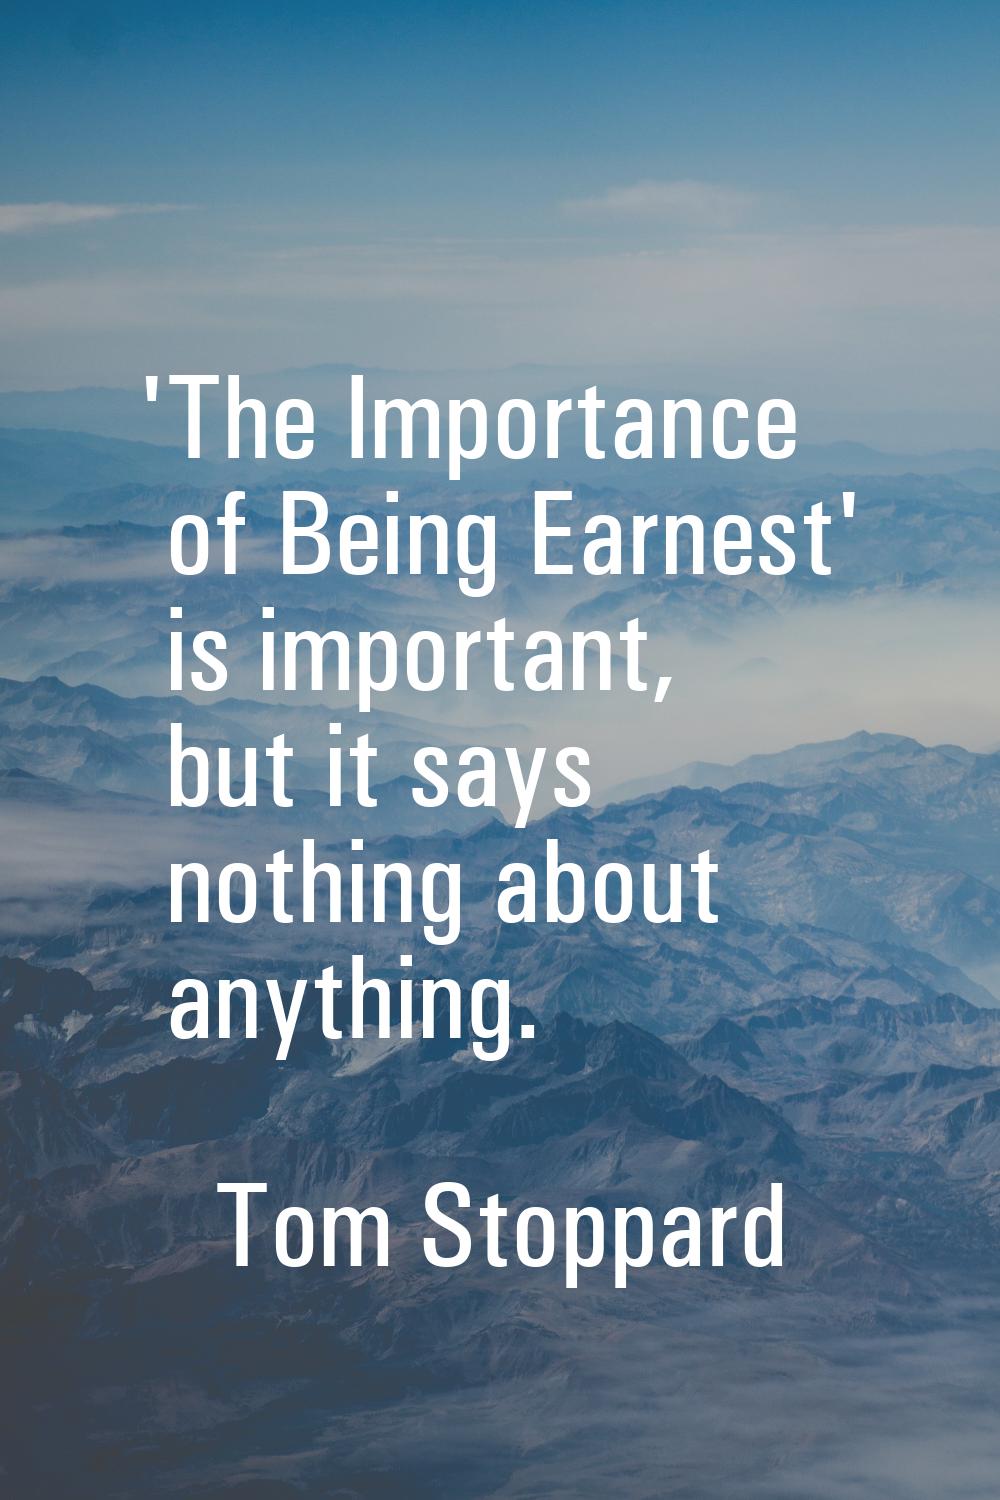 'The Importance of Being Earnest' is important, but it says nothing about anything.